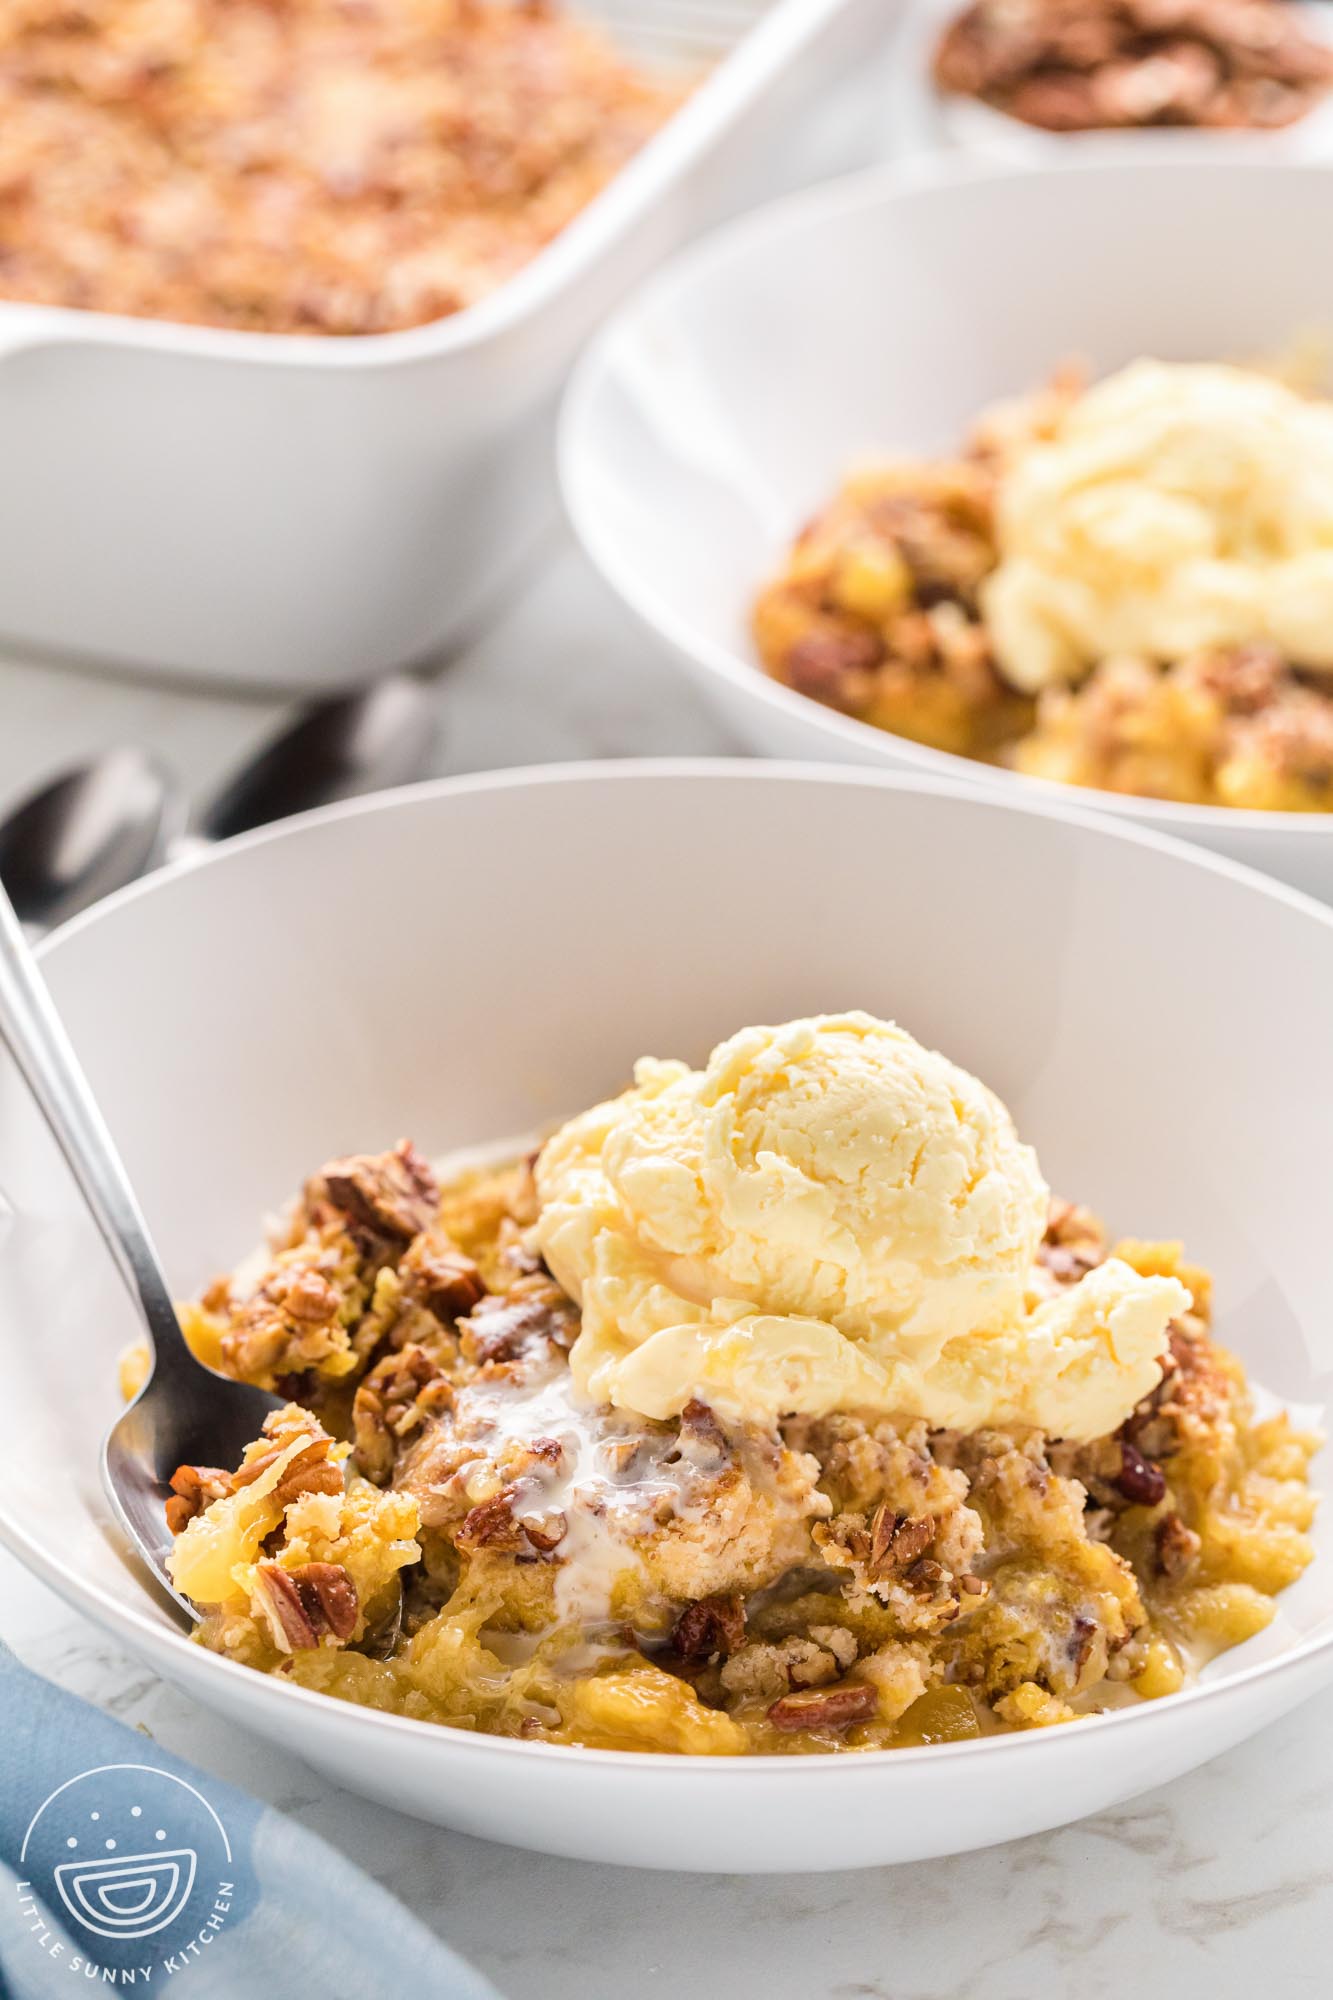 a scoop of warm pineapple dump cake topped with a scoop of ice cream in a white bowl with a spoon.